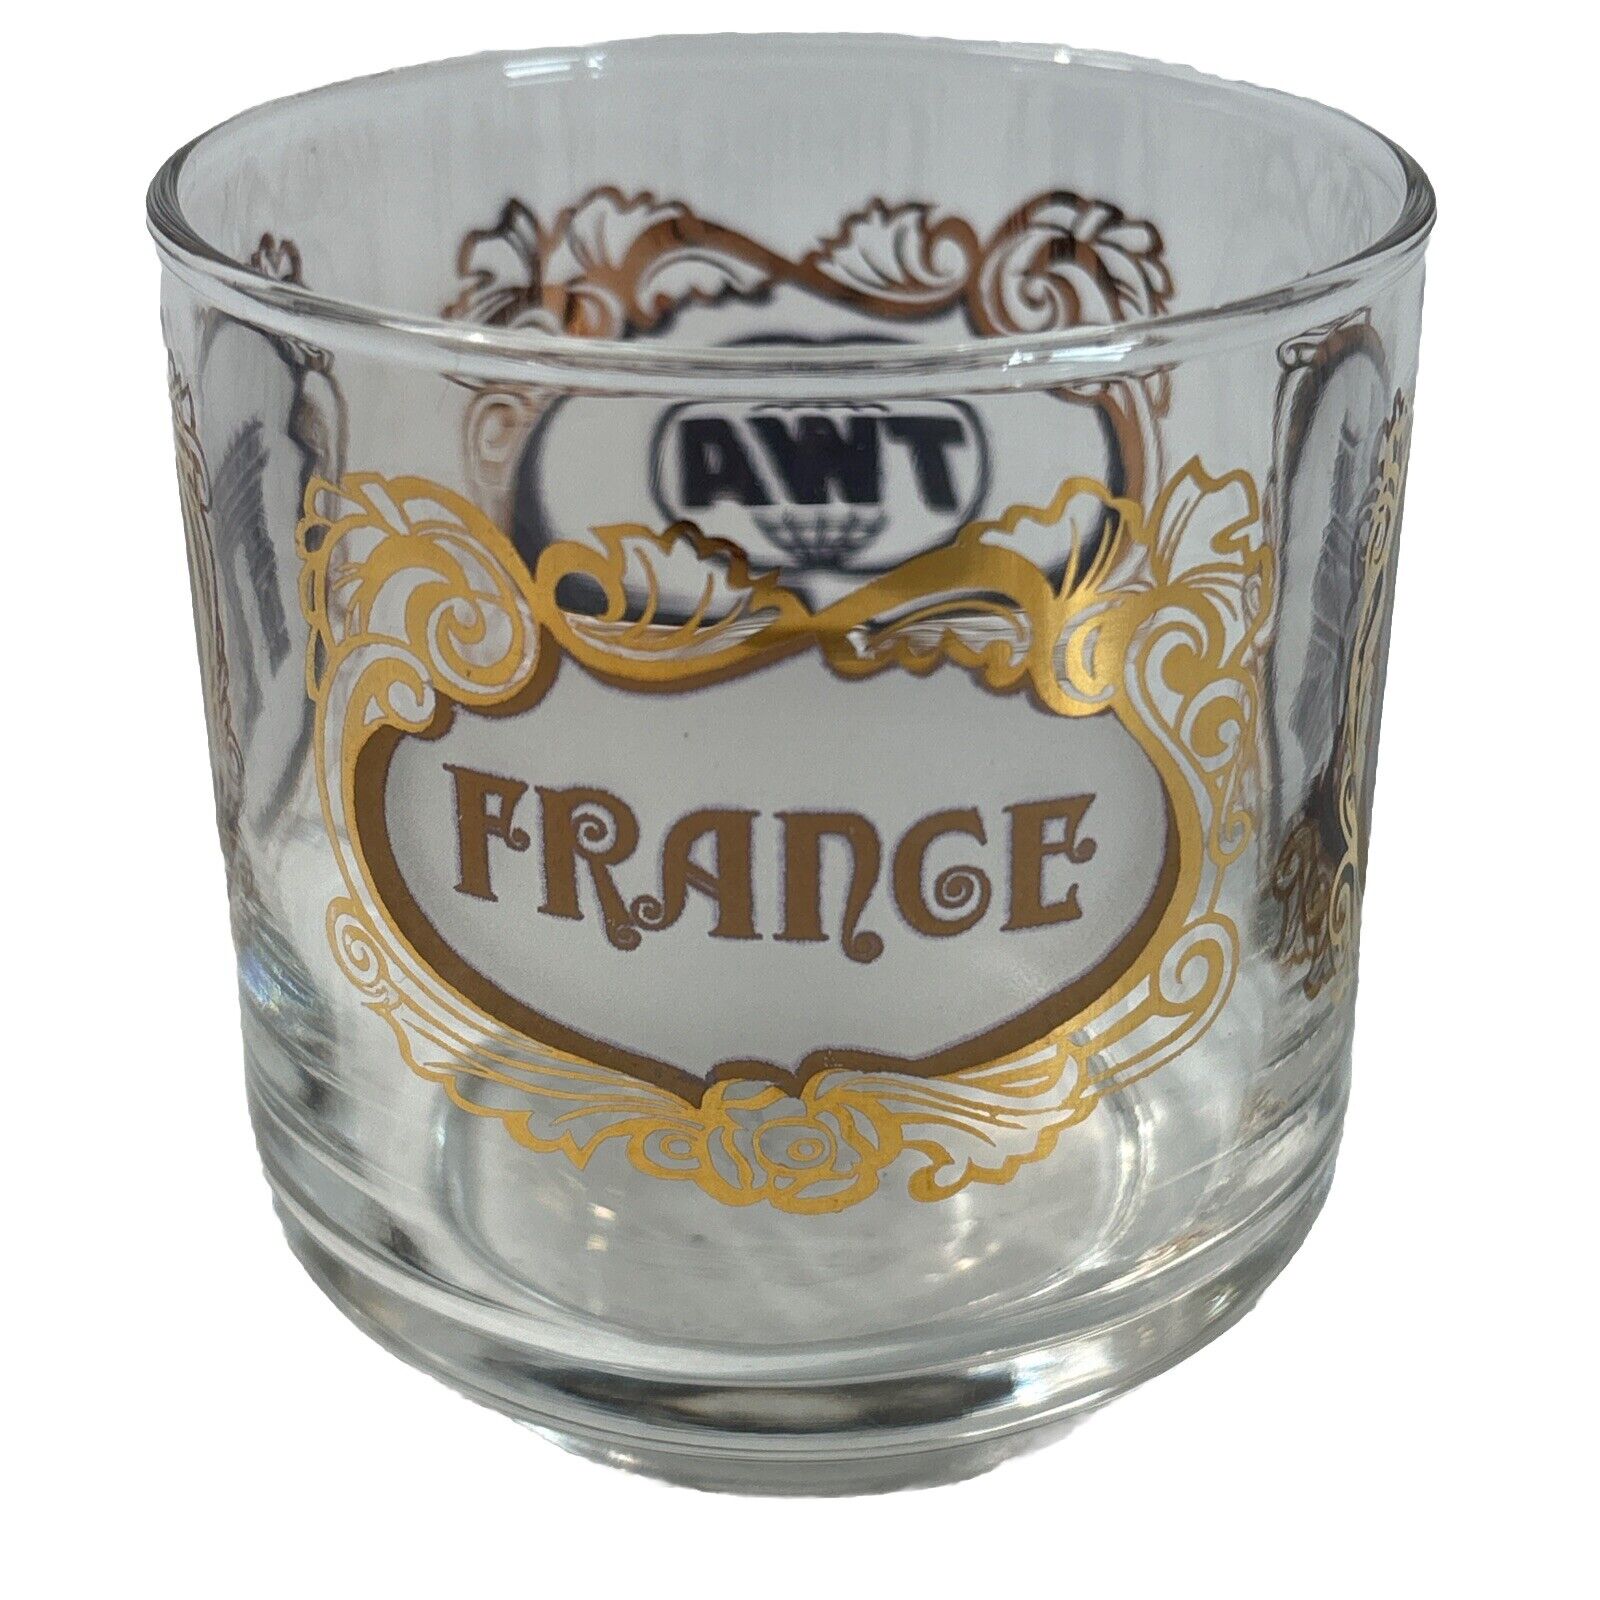 Vintage TWA Airlines The world of France Drinking glass tumbler